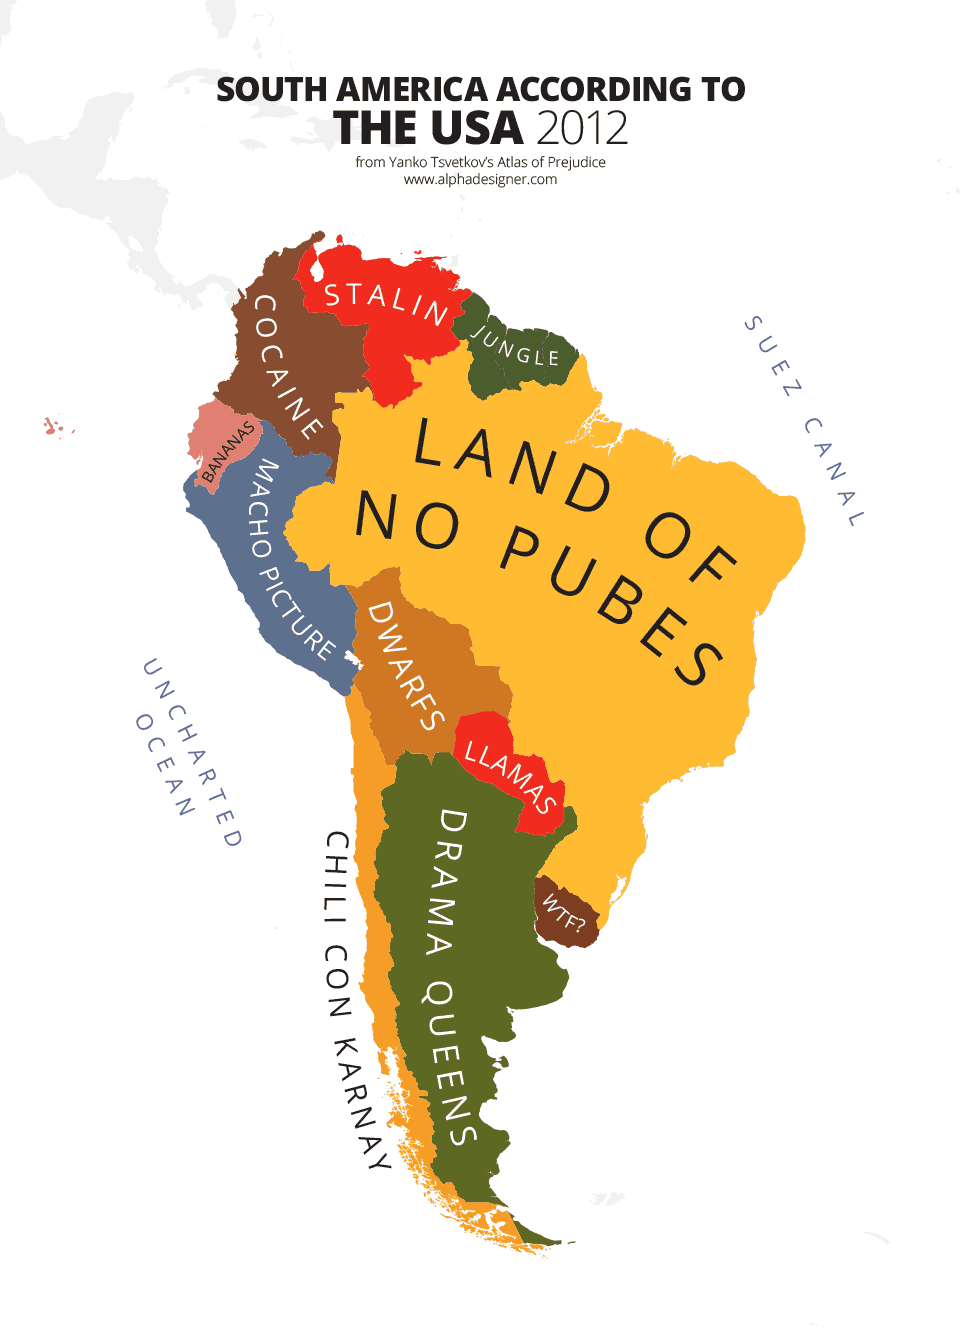 Map of South America According to USA